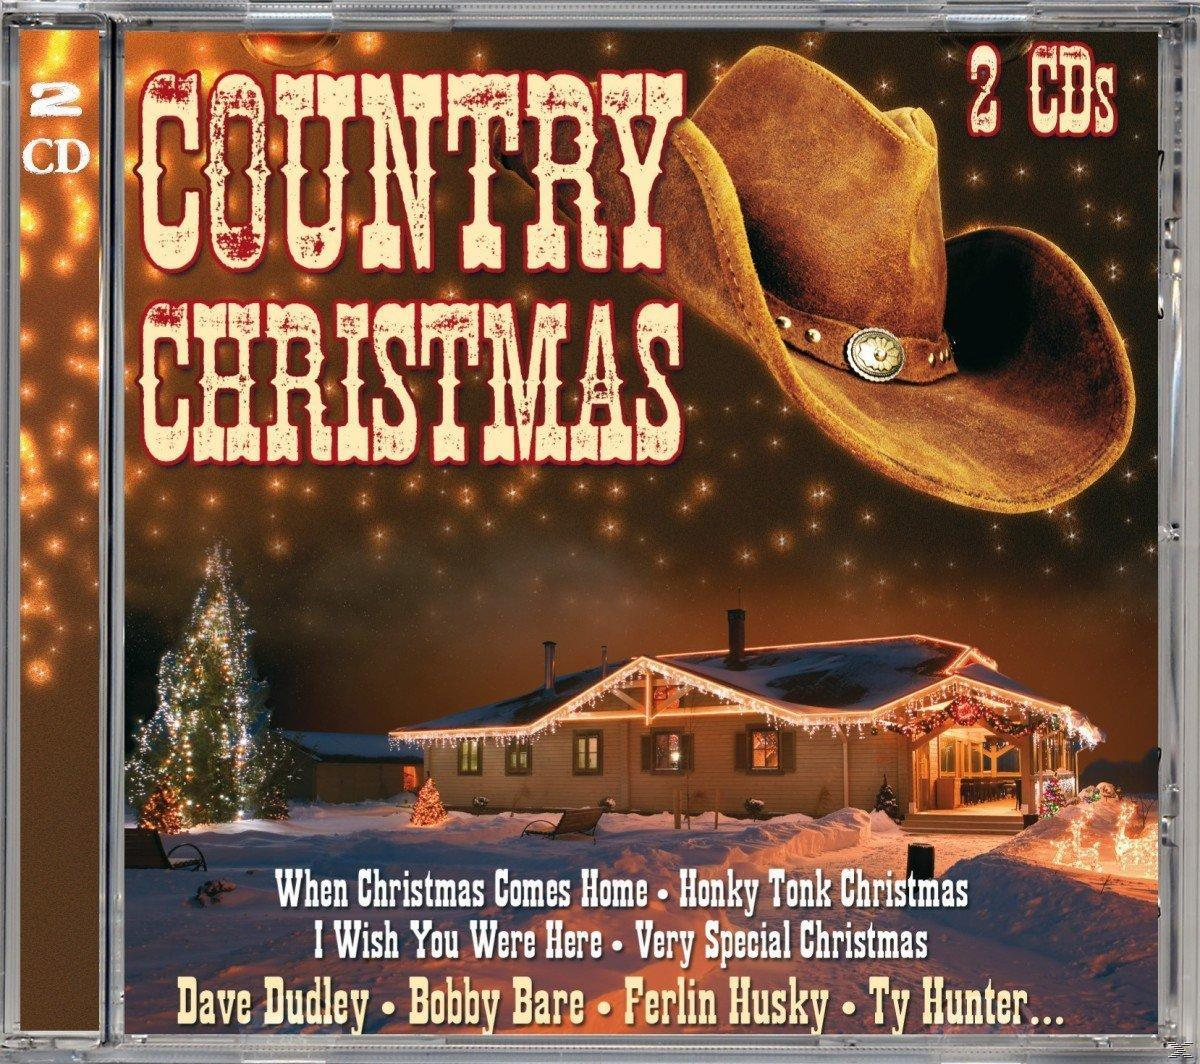 VARIOUS Country - - Christmas (CD)